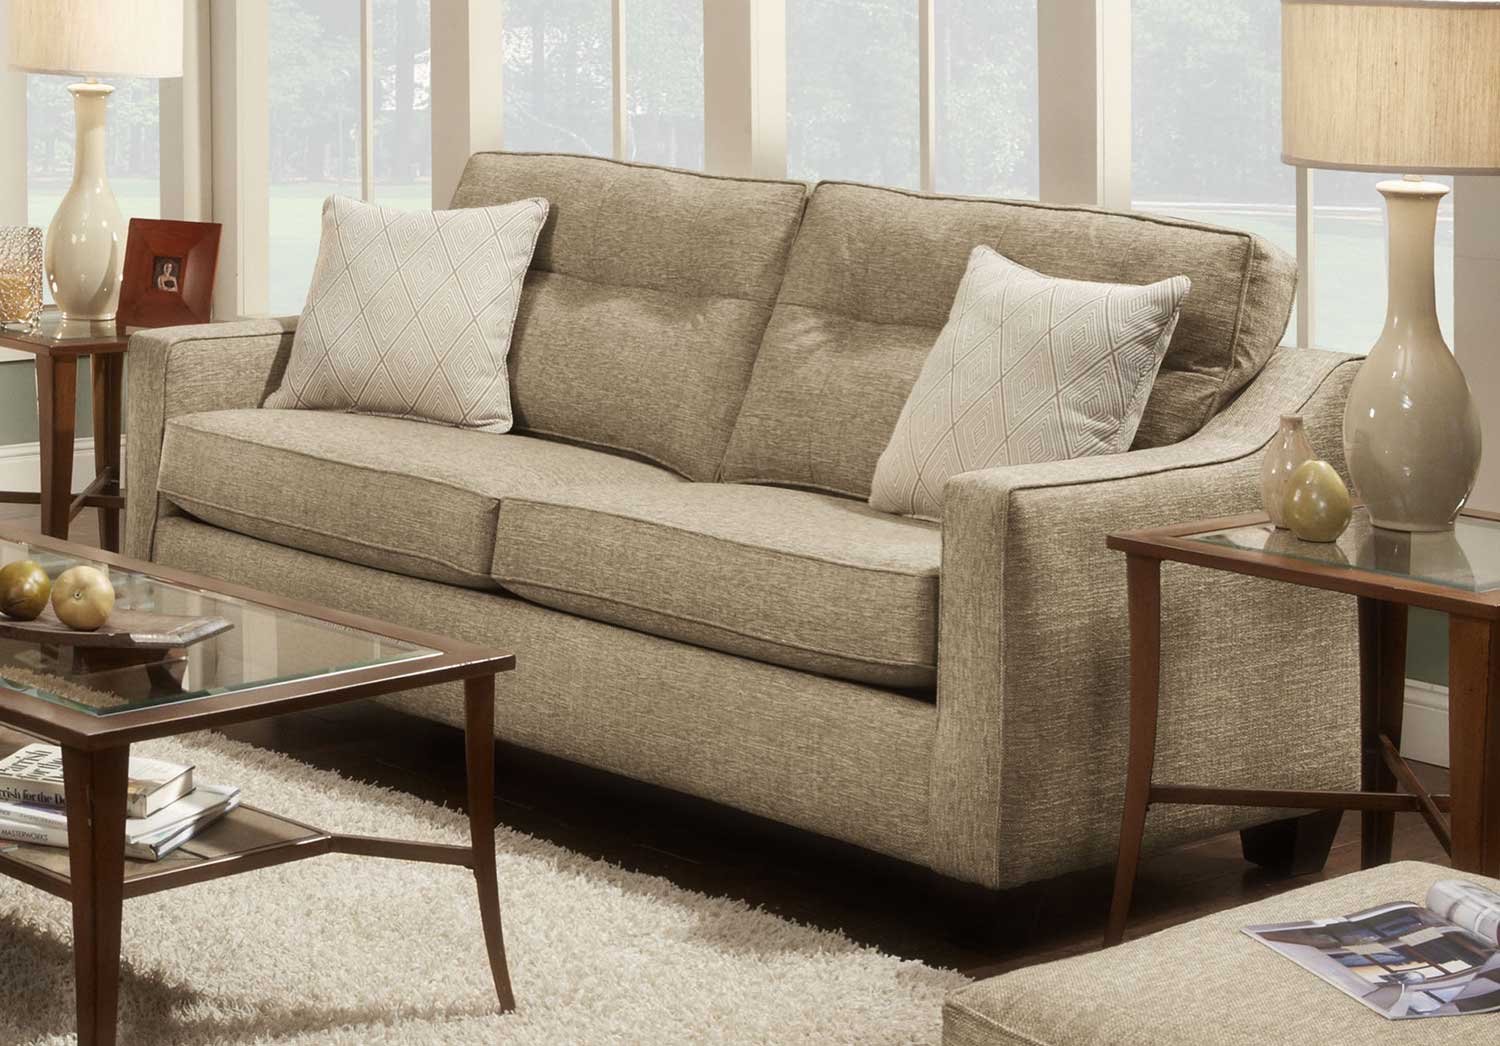 Chelsea Home Colby Sofa - Light Brown